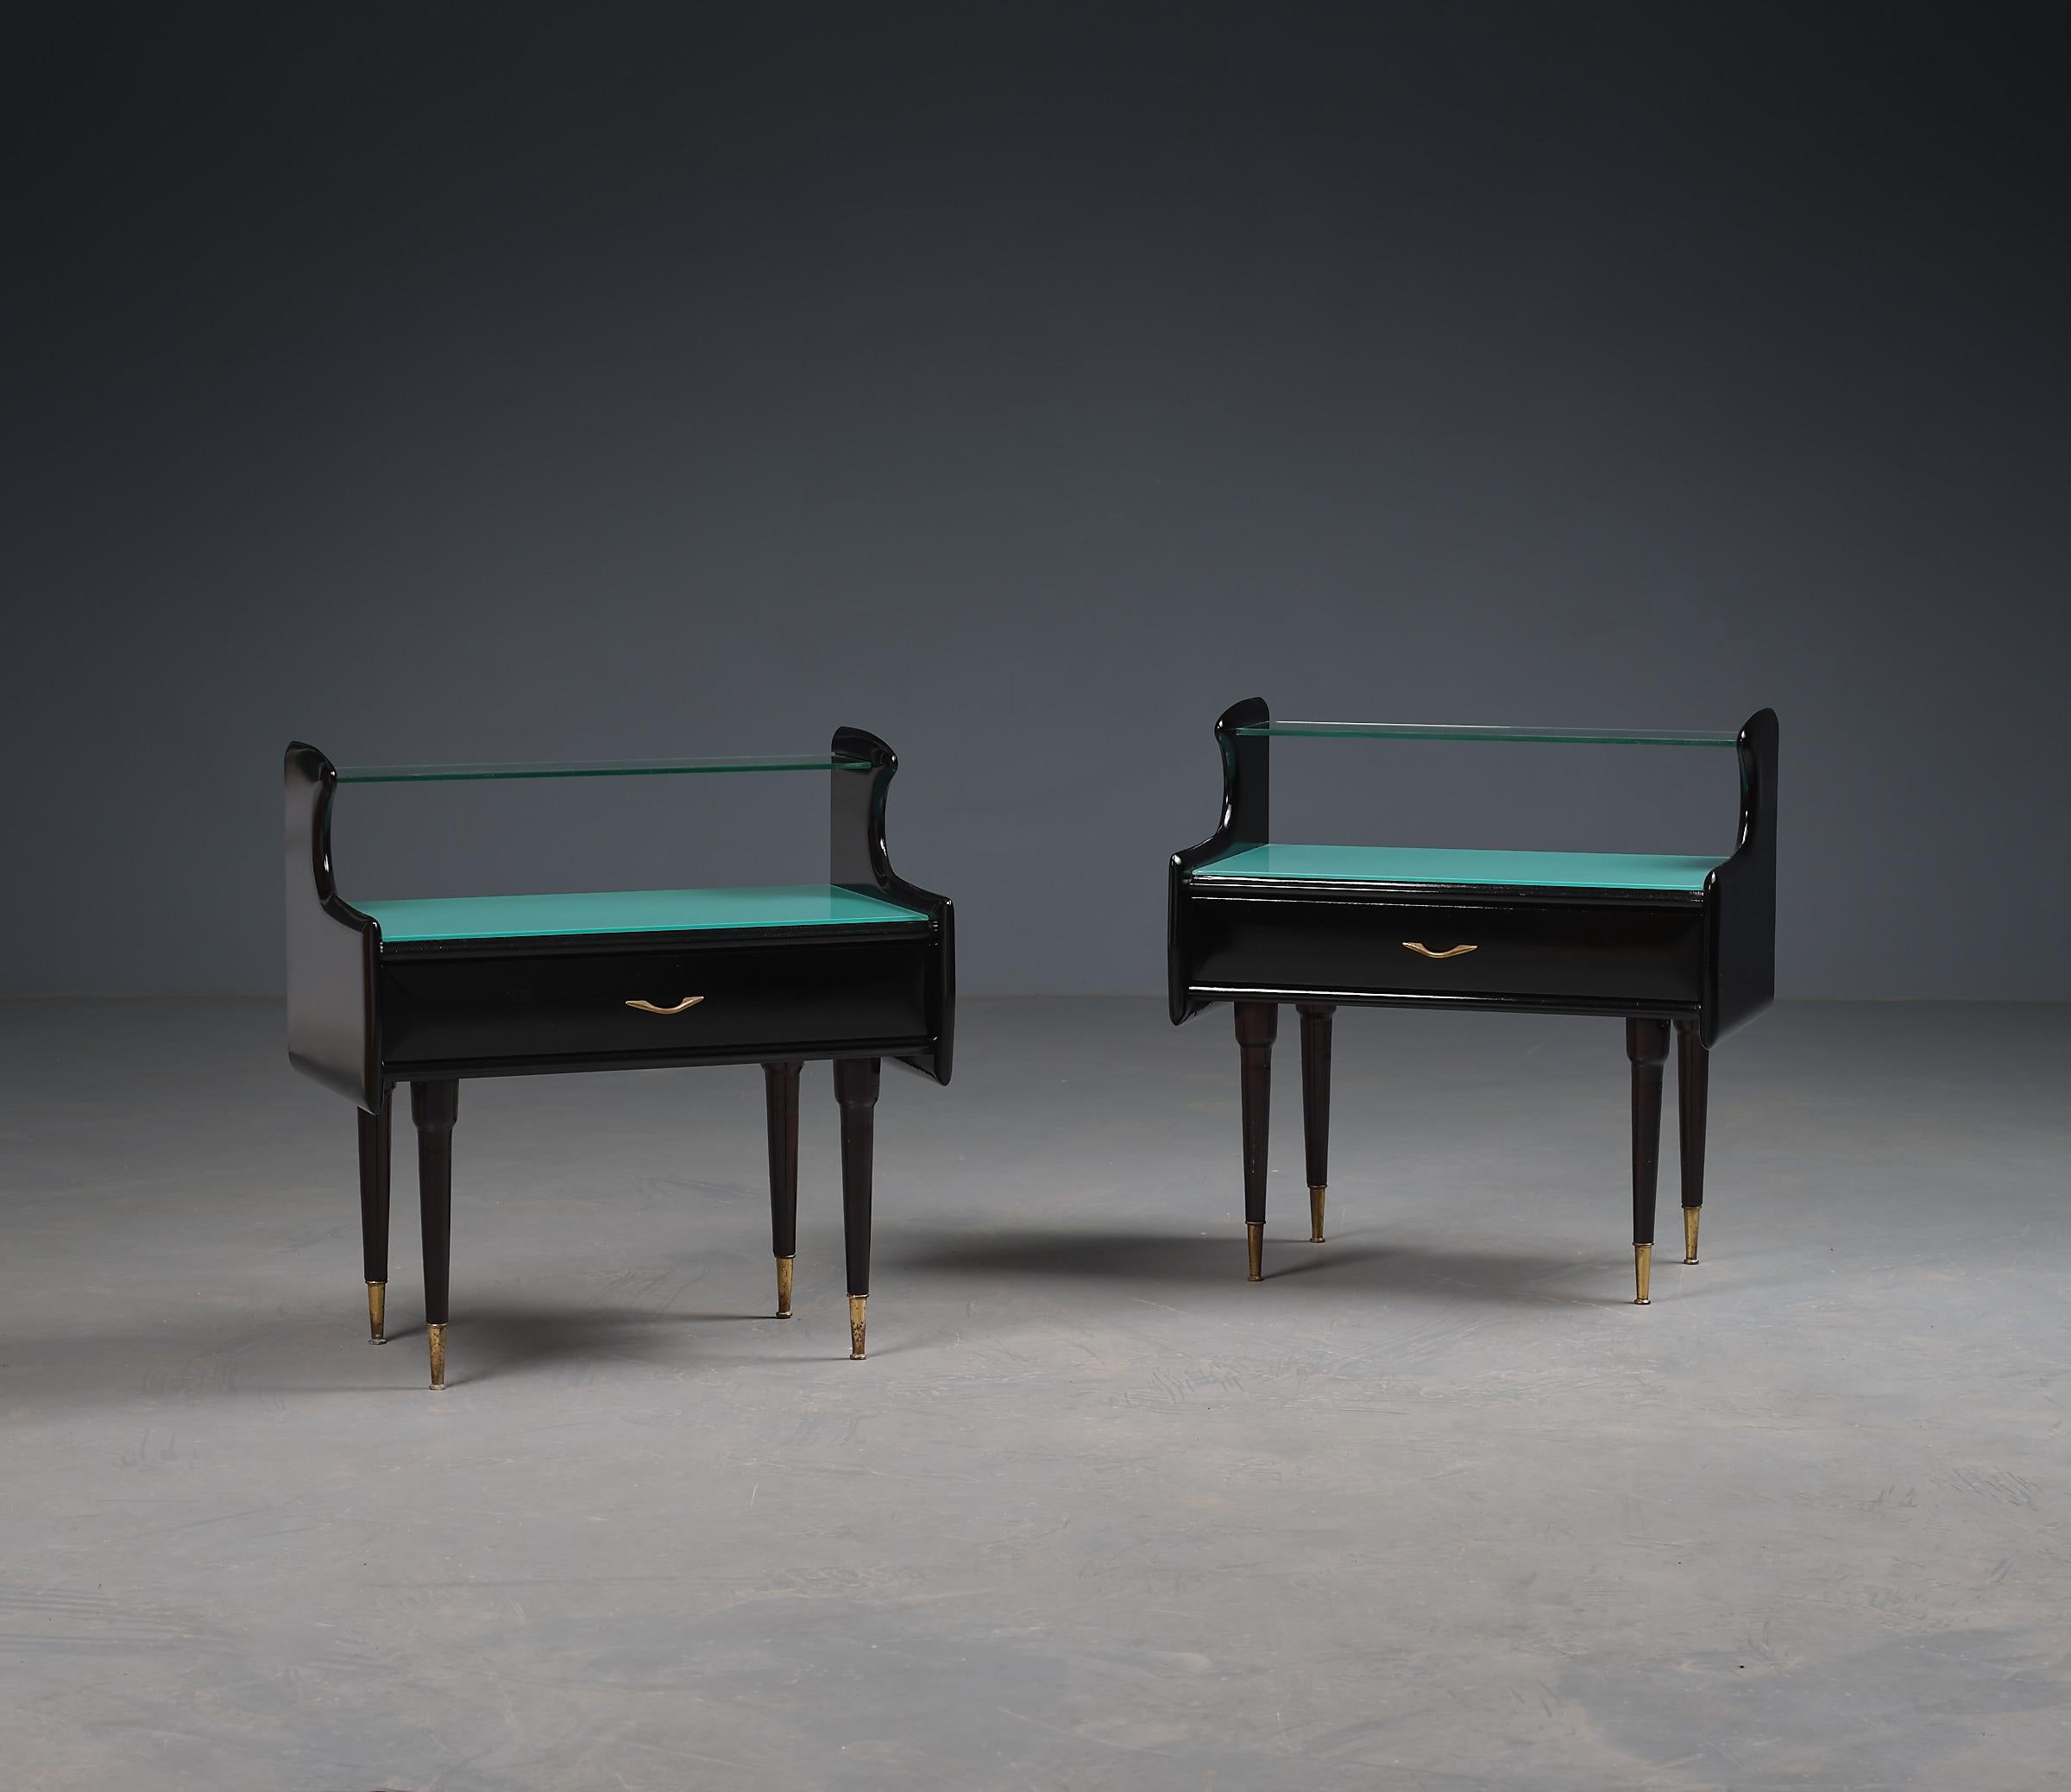 This sophisticated pair of Italian nightstands from the 1950s exemplifies the luxurious design principles of the mid-century era. Having been recently renewed with a fresh, high-quality black lacquer finish, these nightstands gleam with a polished